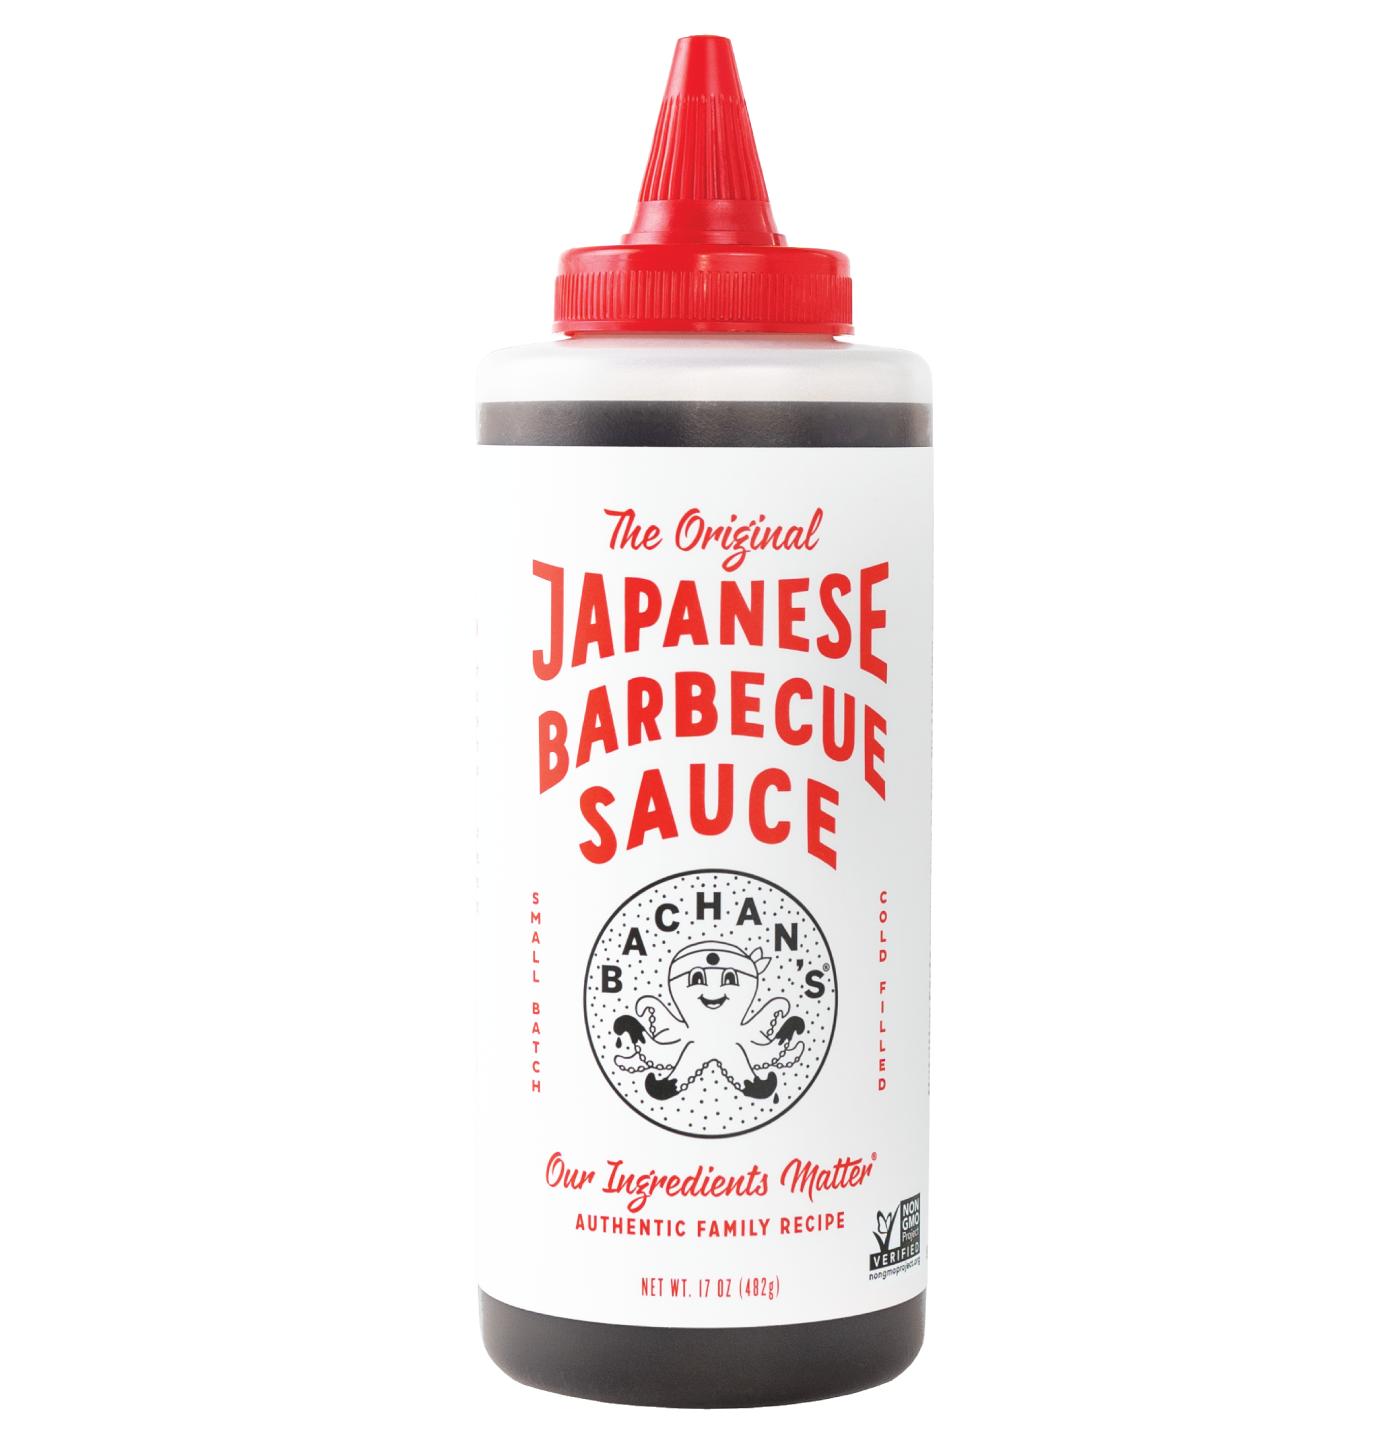 BACHAN'S JAPANESE BARBECUE SAUCE